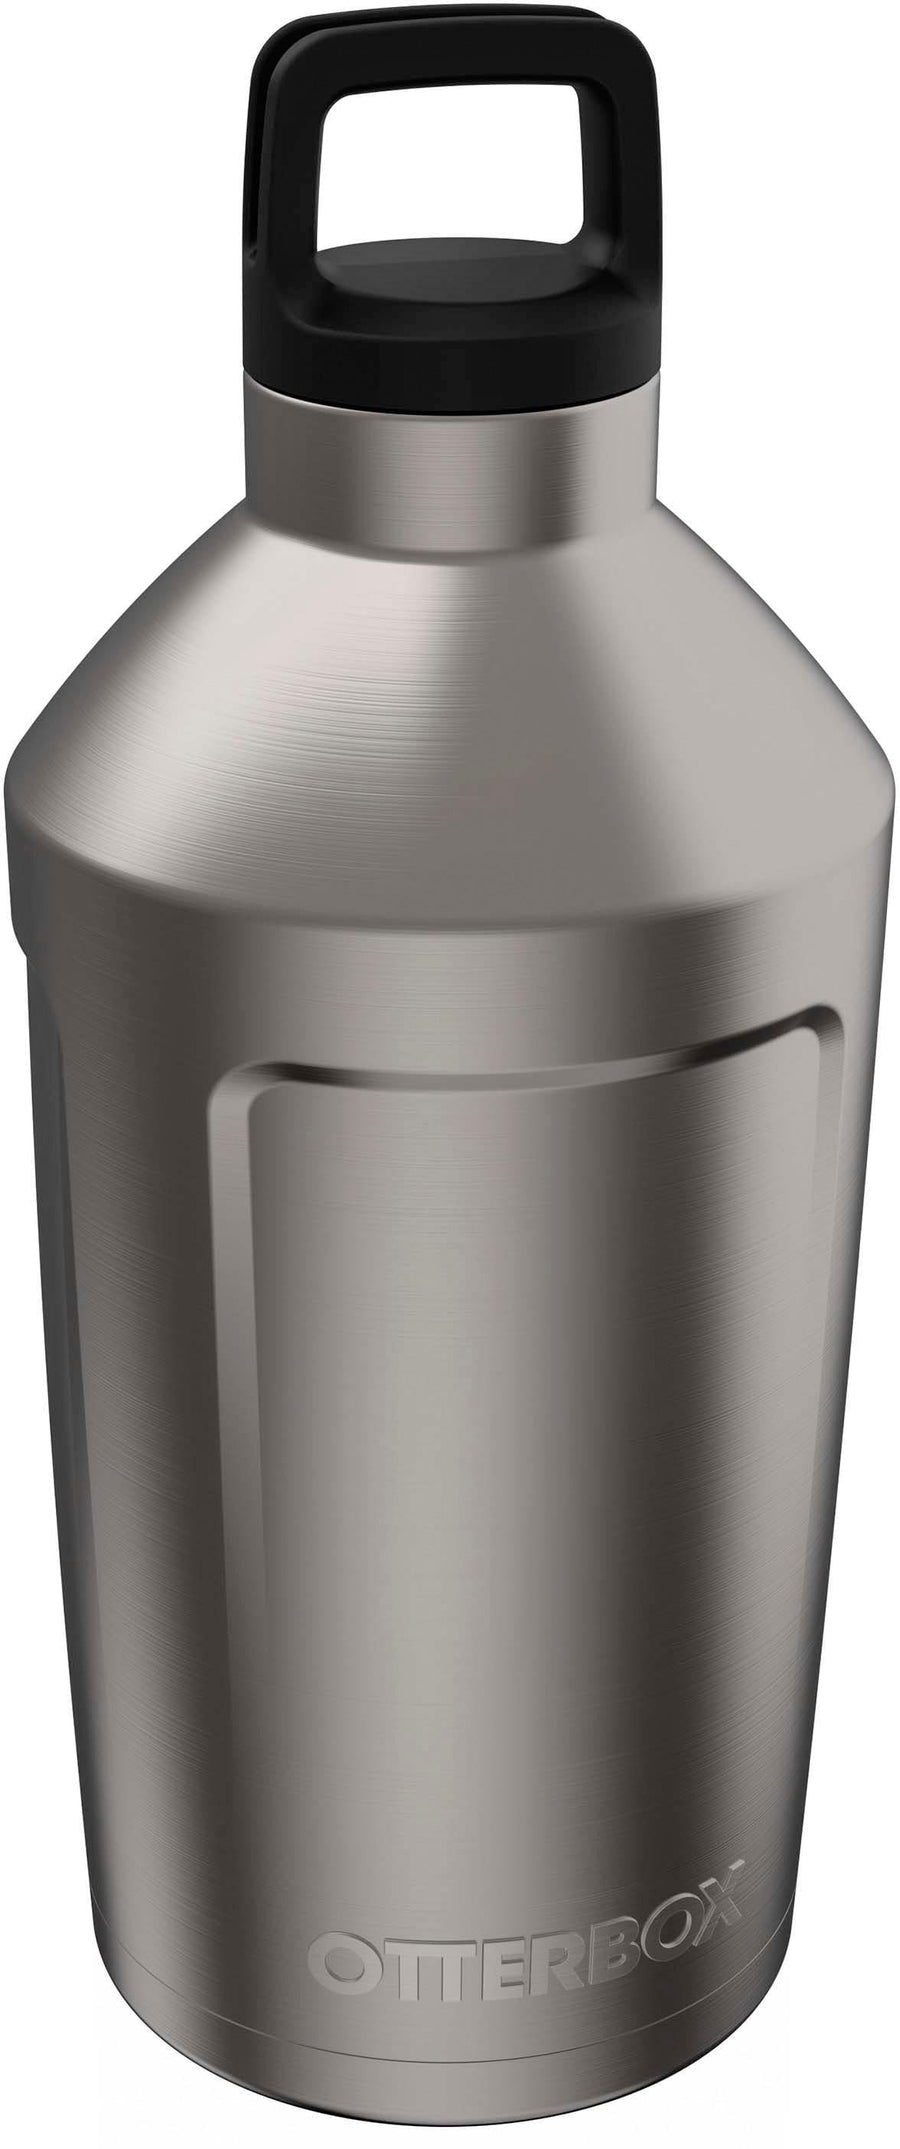 OtterBox - Elevation 64 Tumbler - Stainless Steel_0